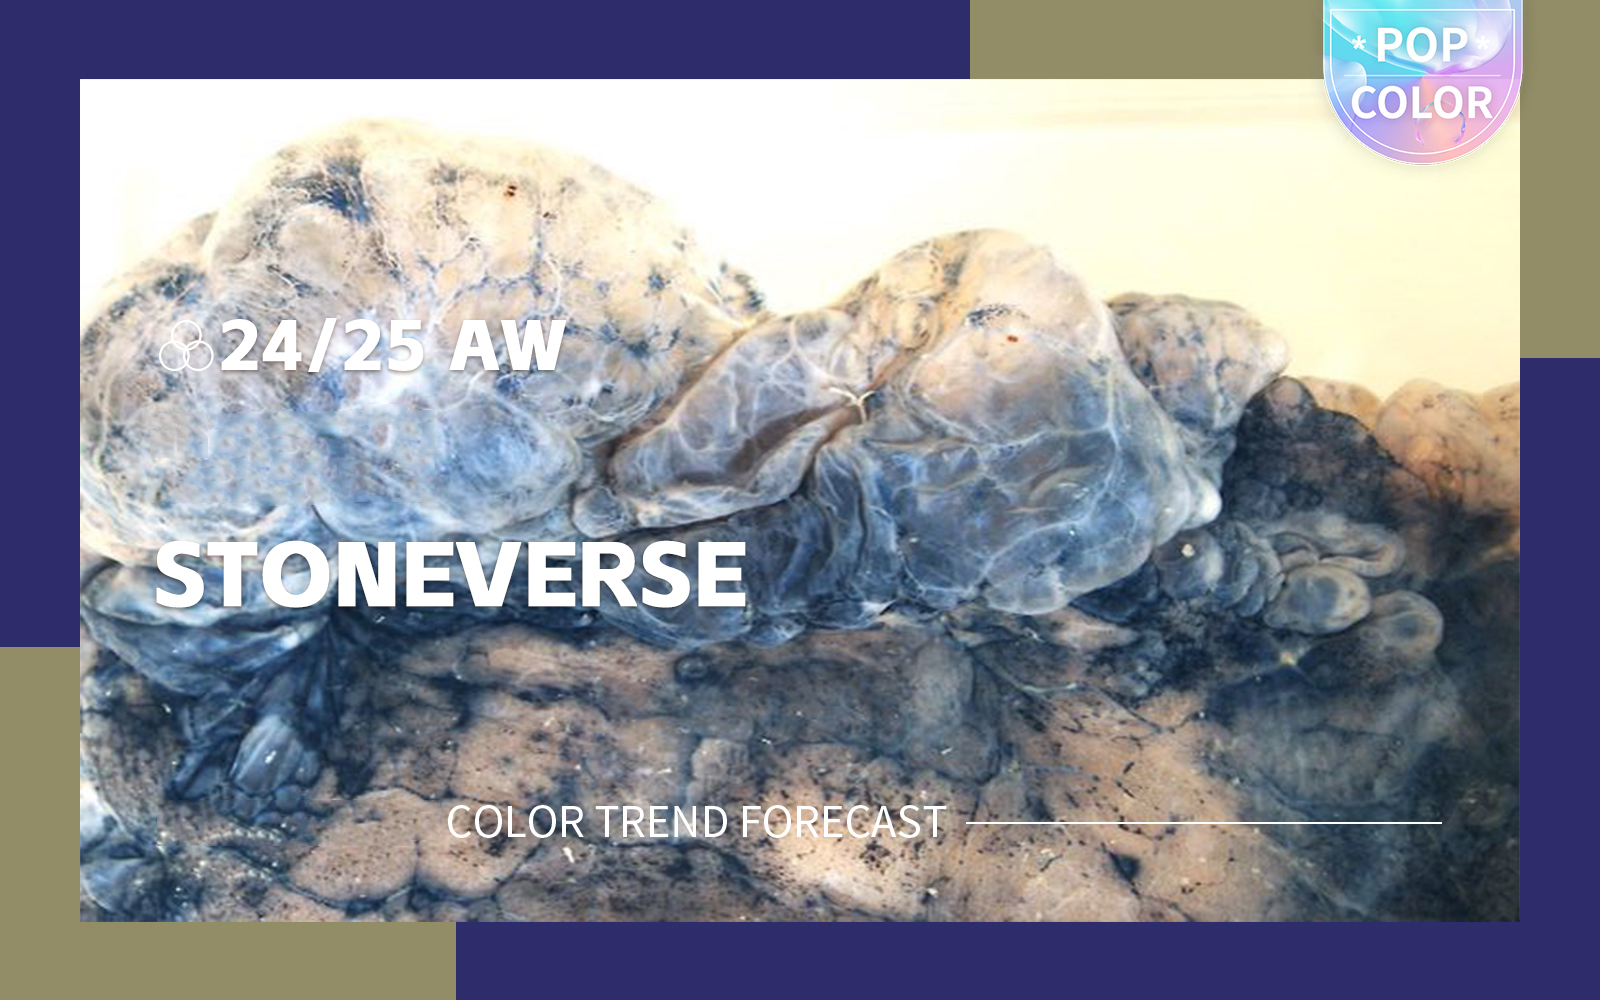 Stoneverse --The A/W 24/25 Color Trend Forecast